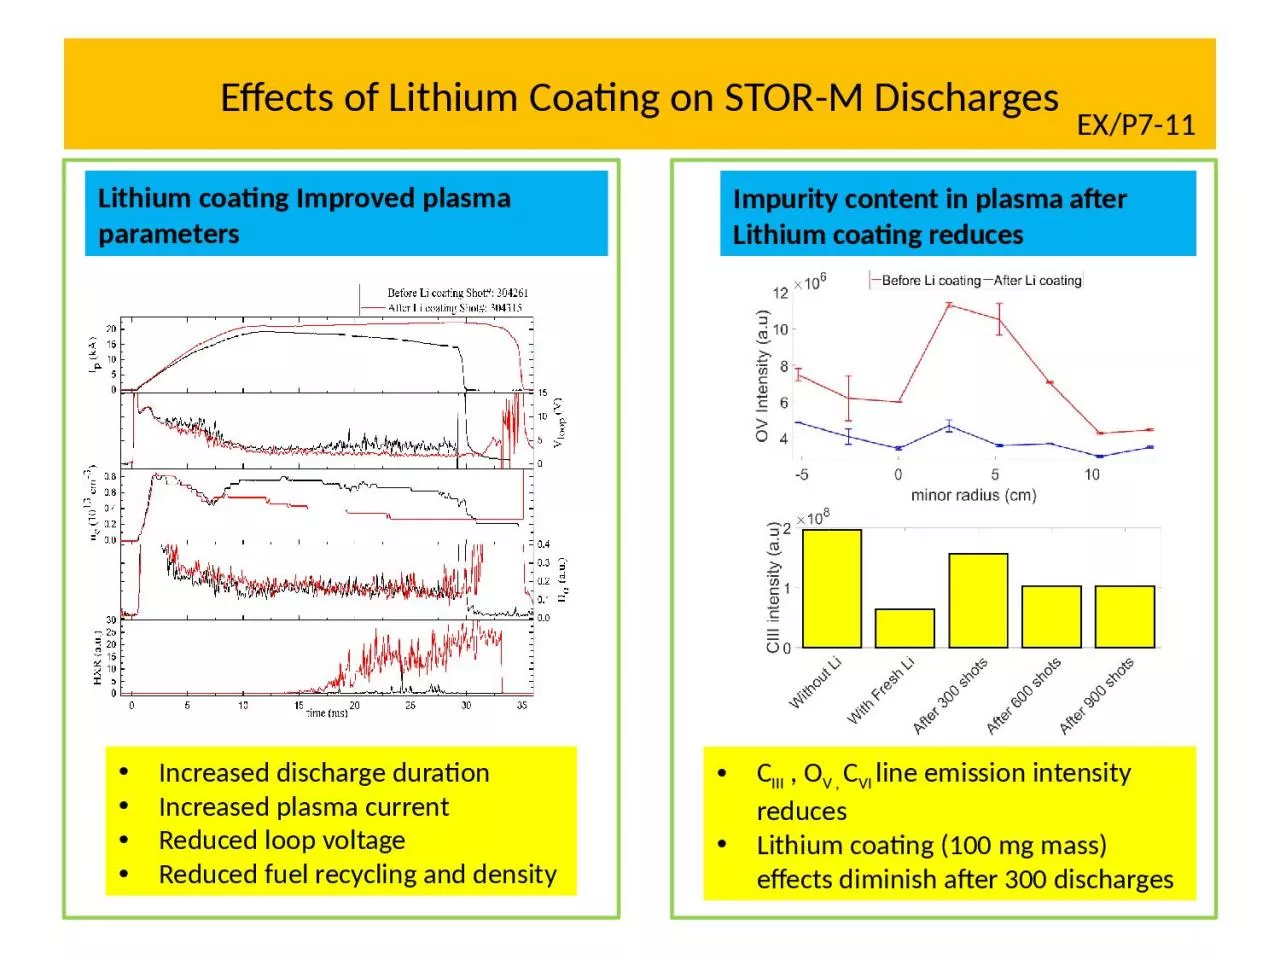 Effects of Lithium Coating on STOR-M Discharges